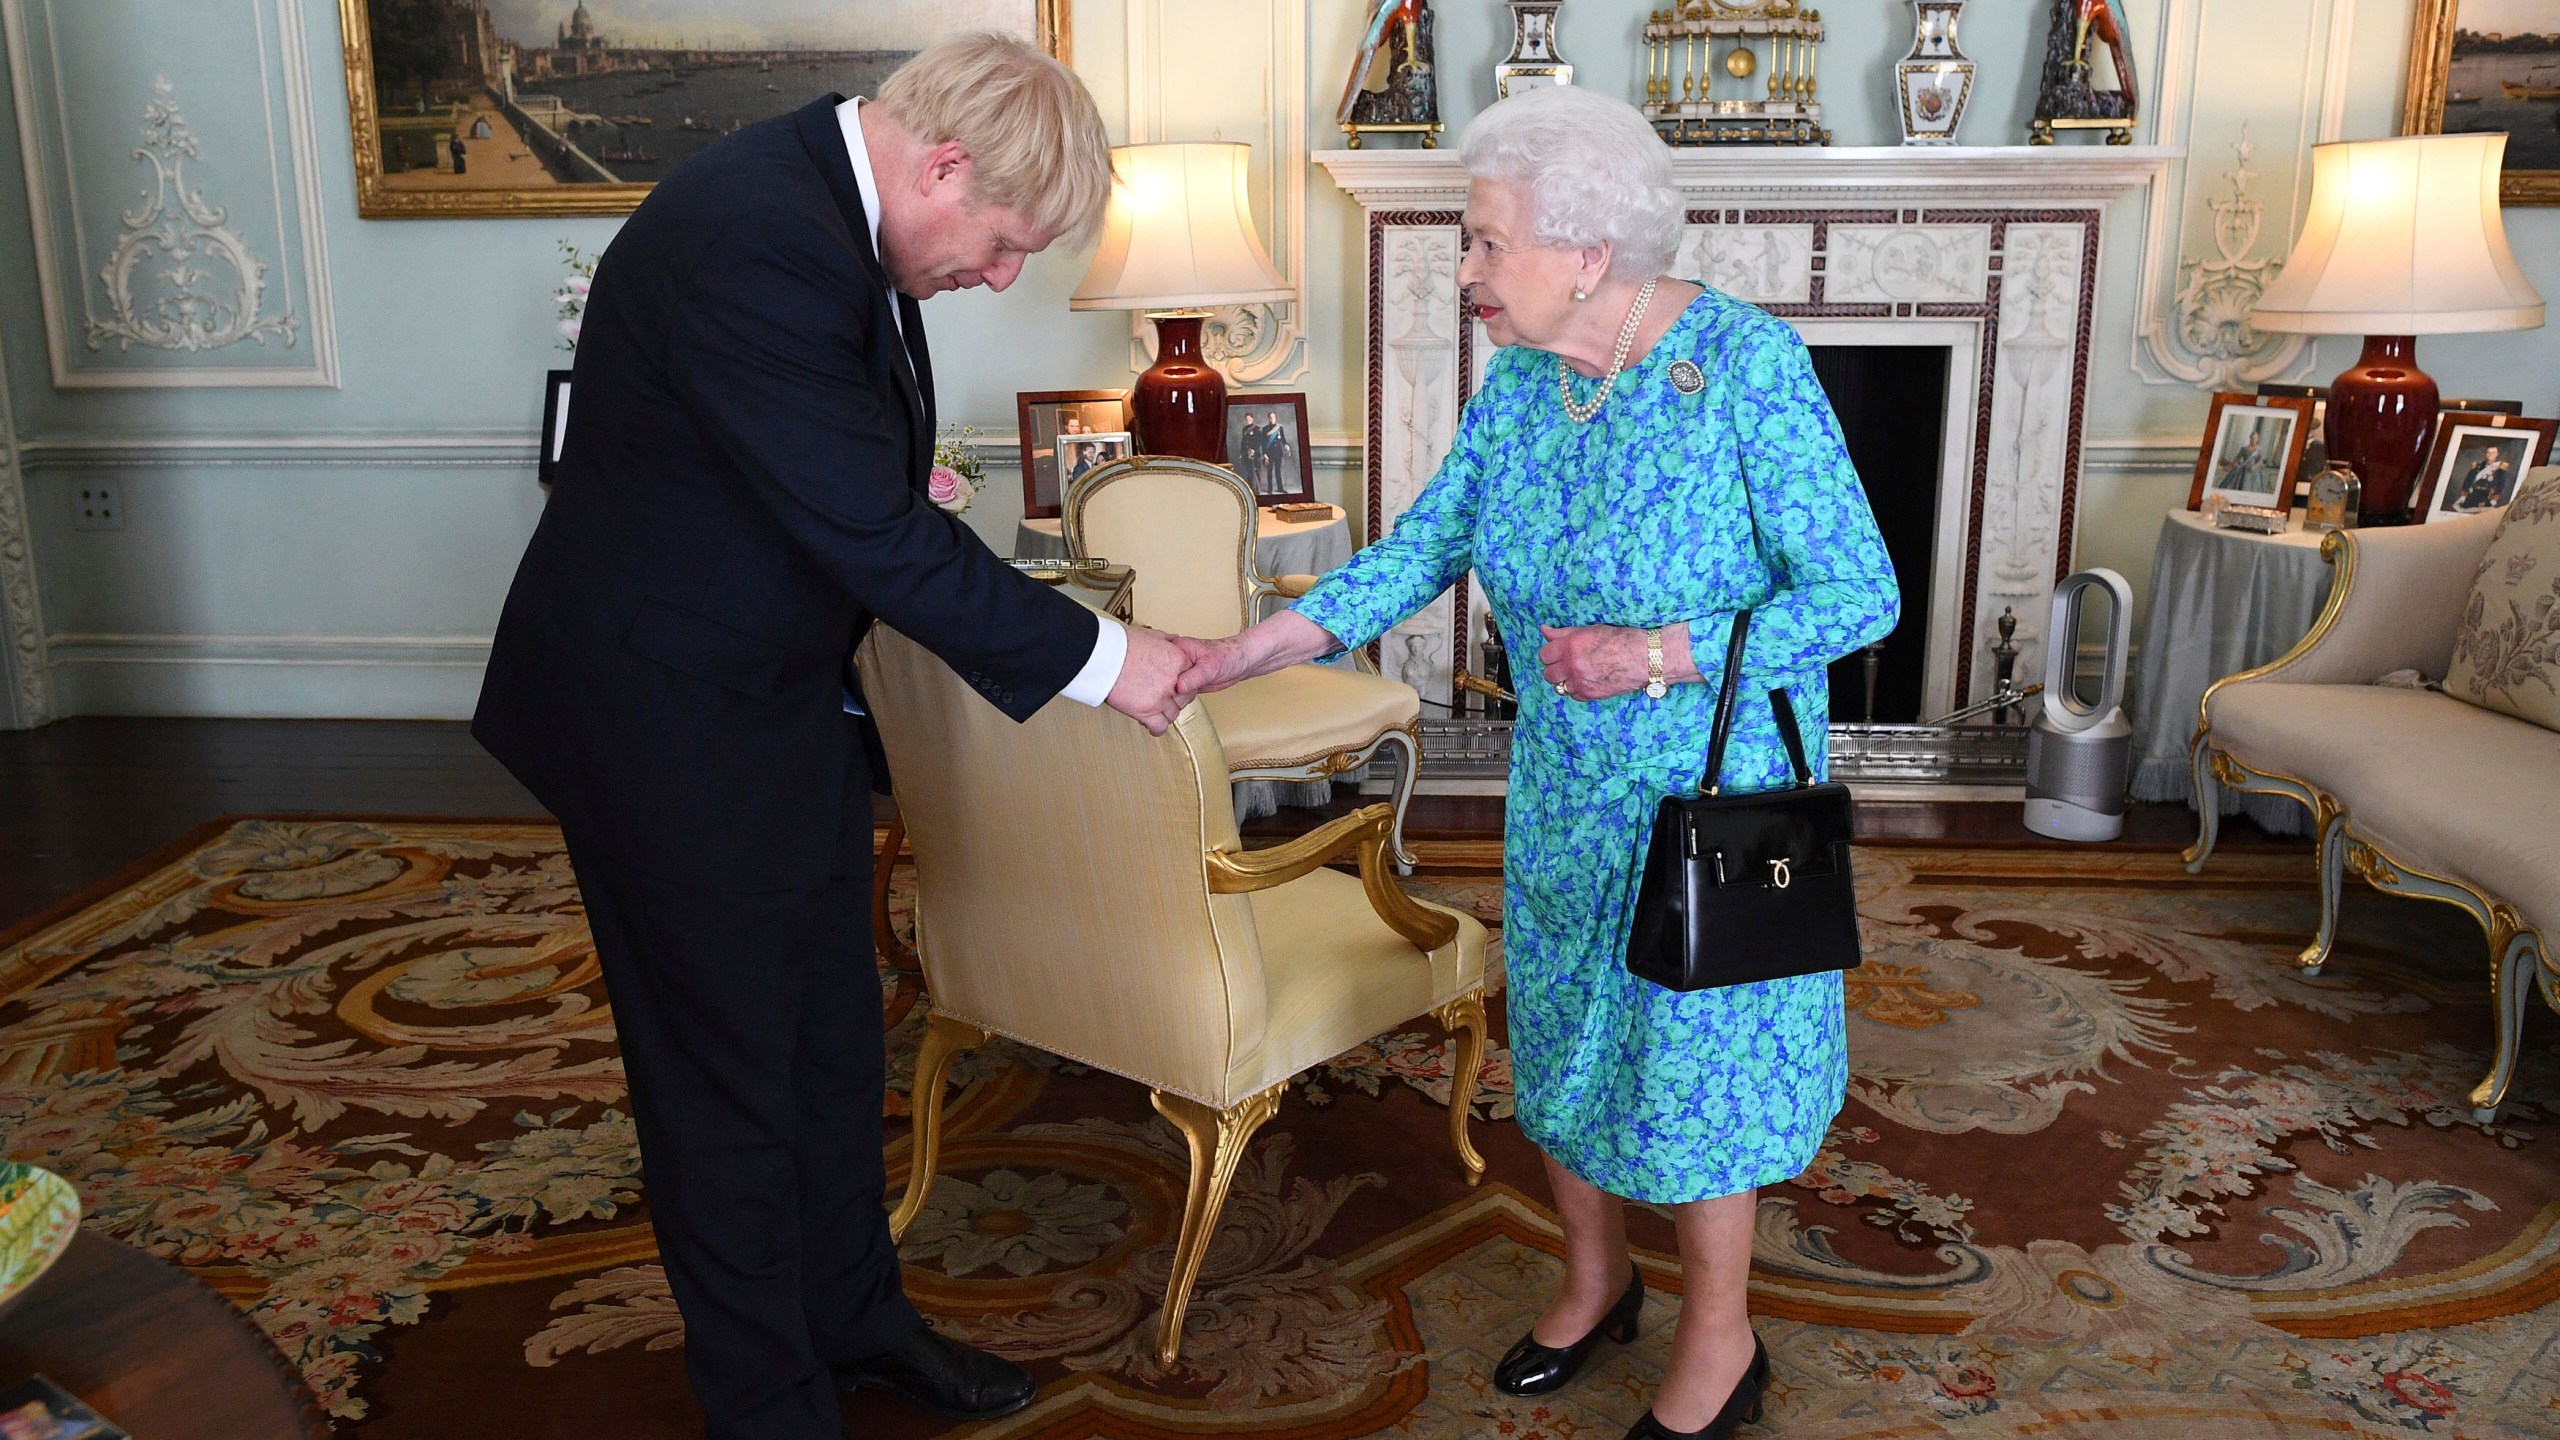 FILE - Britain's Queen Elizabeth II welcomes newly elected leader of the Conservative party Boris Johnson during an audience at Buckingham Palace, London, on July 24, 2019, where she invited him to become prime minister and form a new government. (Victoria Jones/Pool via AP, File)